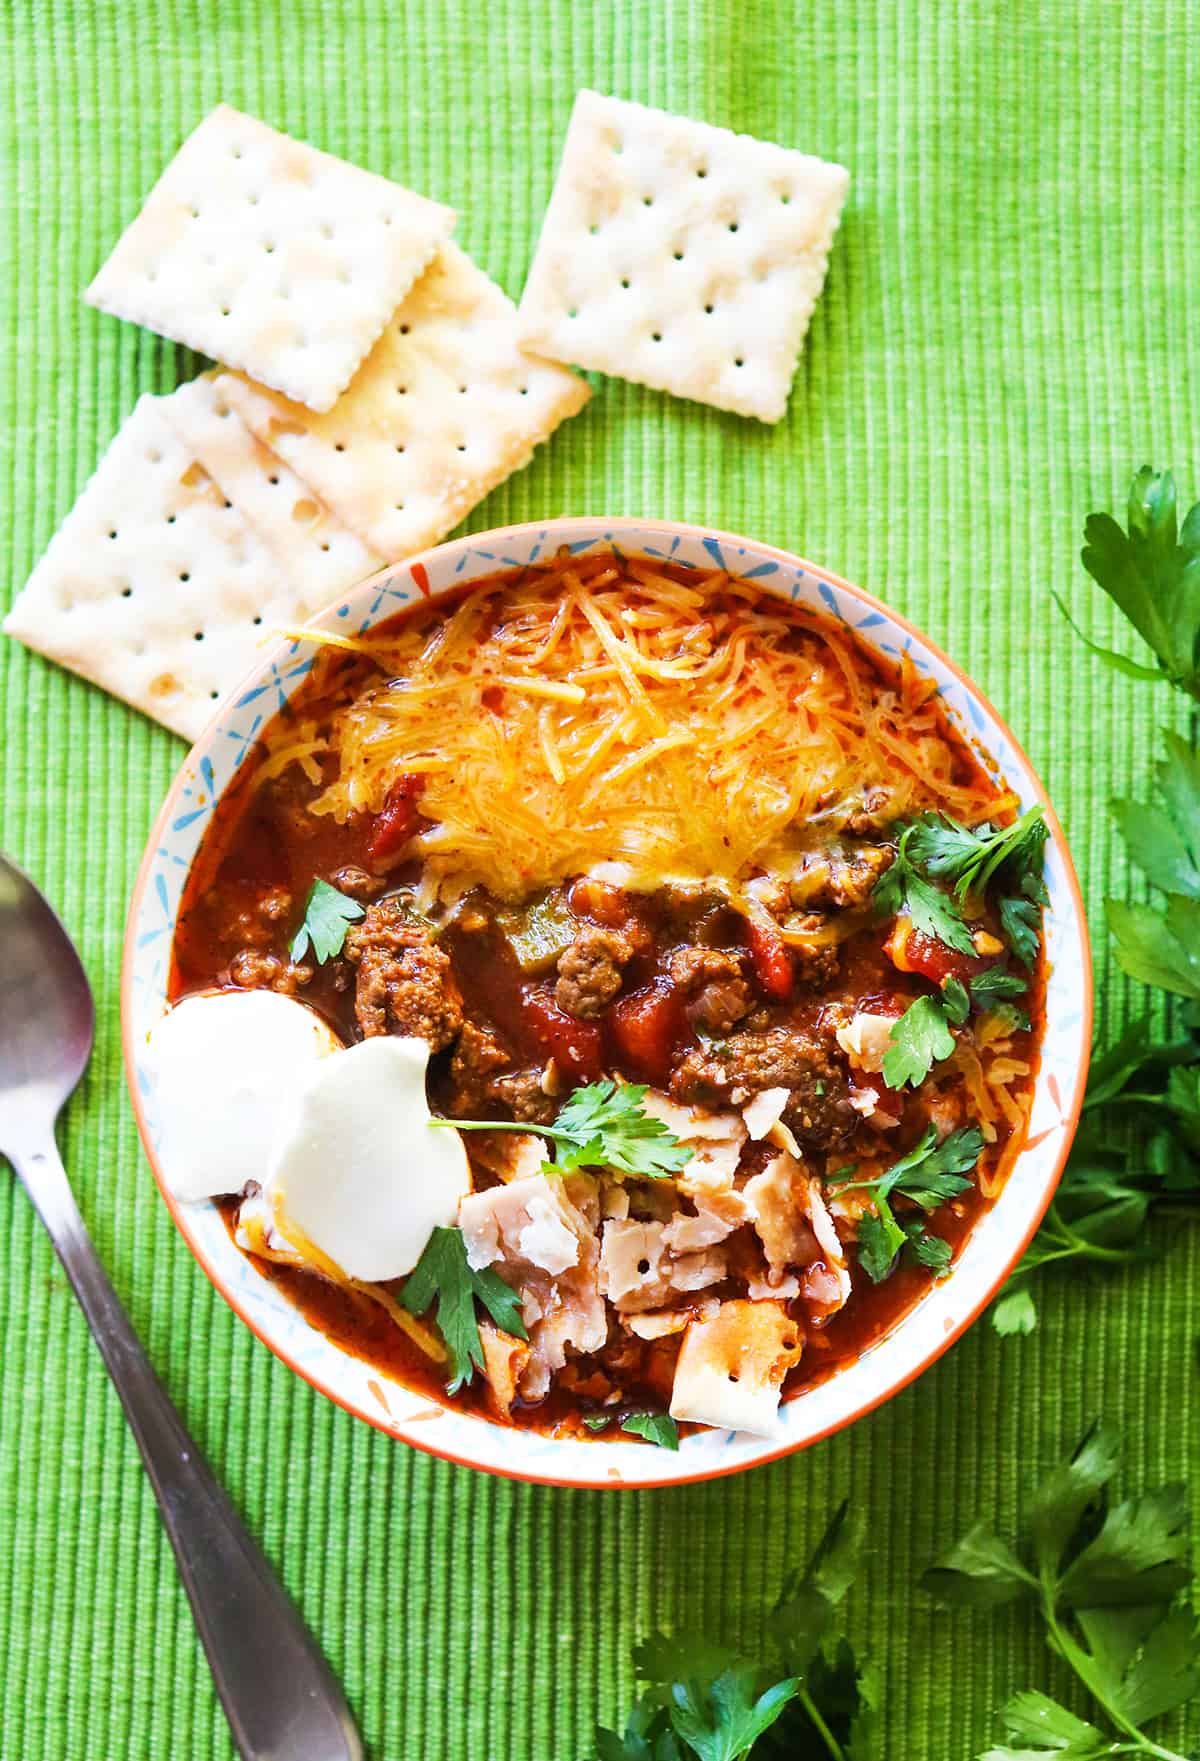 Top view of a bowl of chili surrounded by saltine crackers.